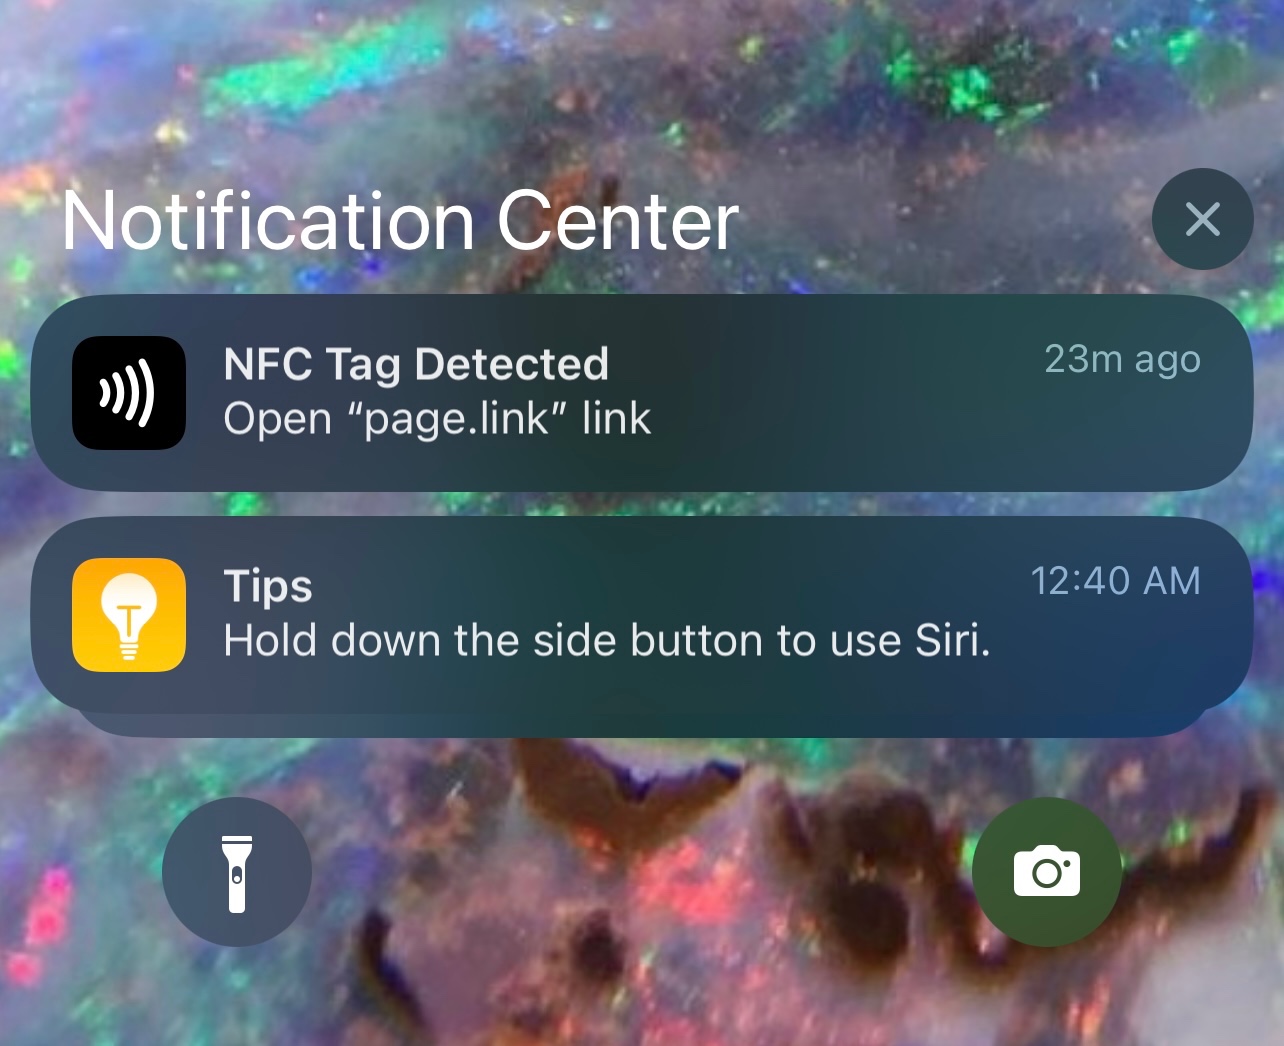 what-does-nfc-tag-detected-mean